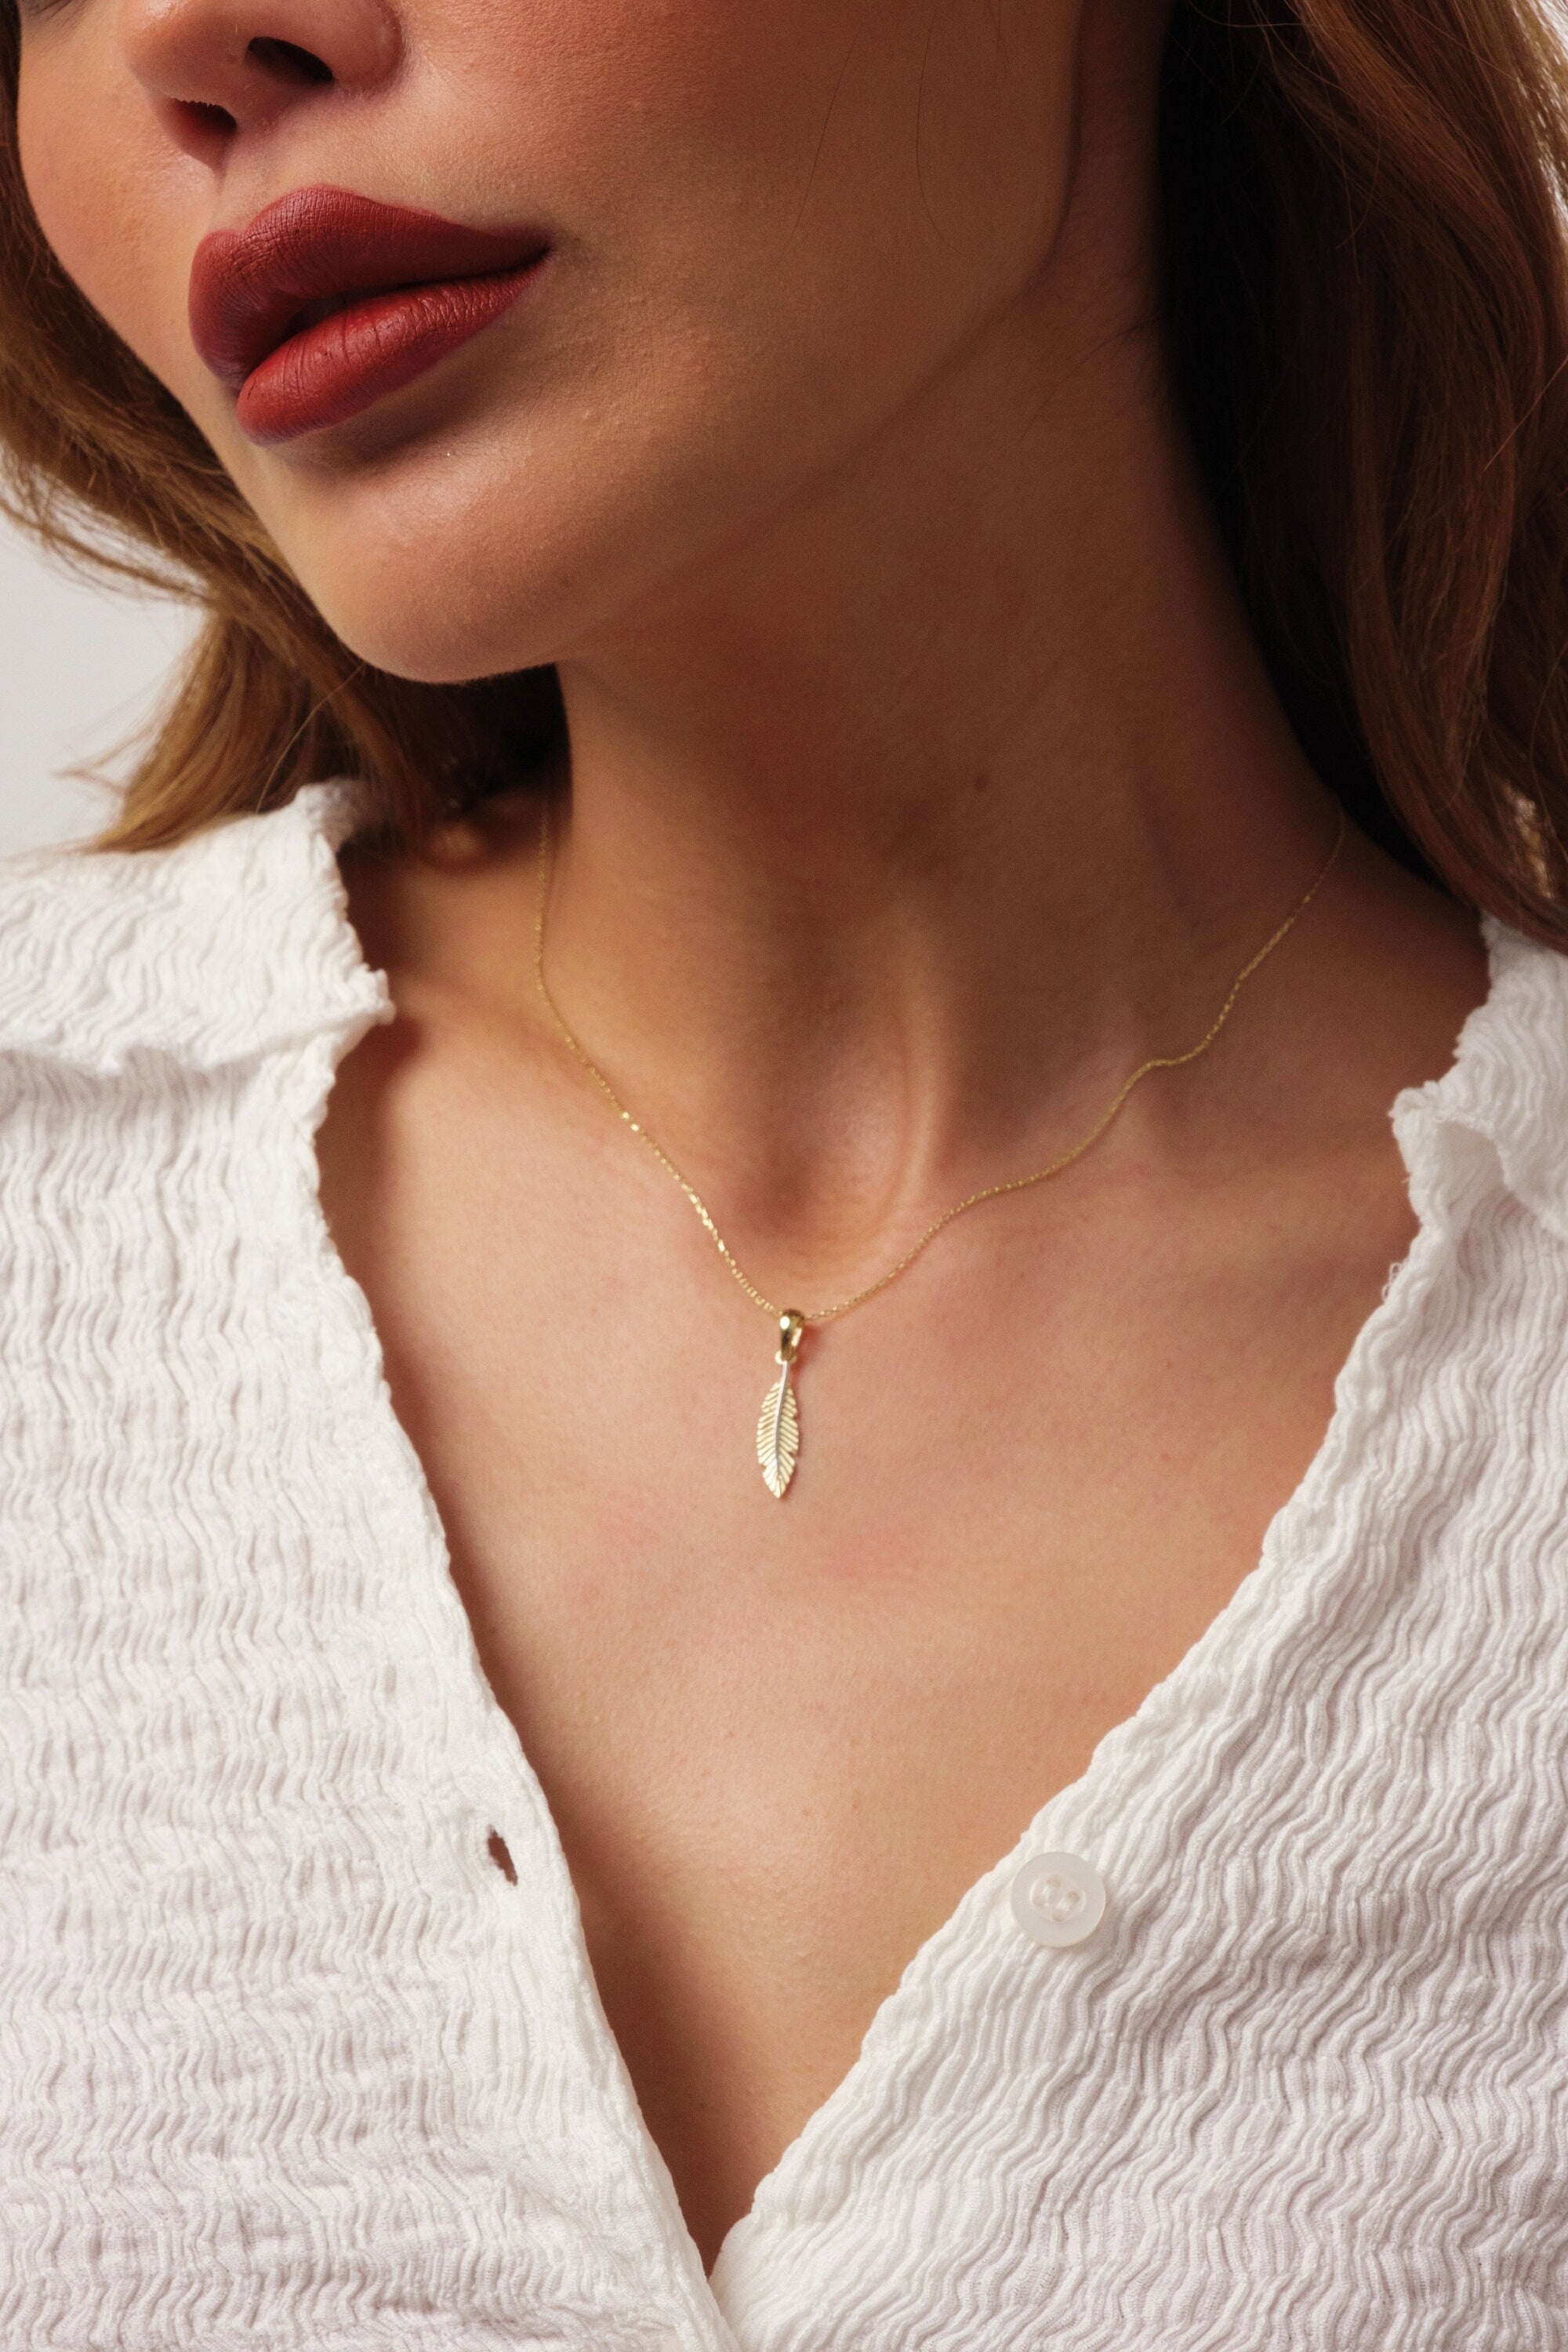 14K Gold Feather Necklace, Feather Charm Pendant, Dainty Layering Necklace, Minimal Feather Charm Choker, Leaf Necklace, Good Luck Necklace